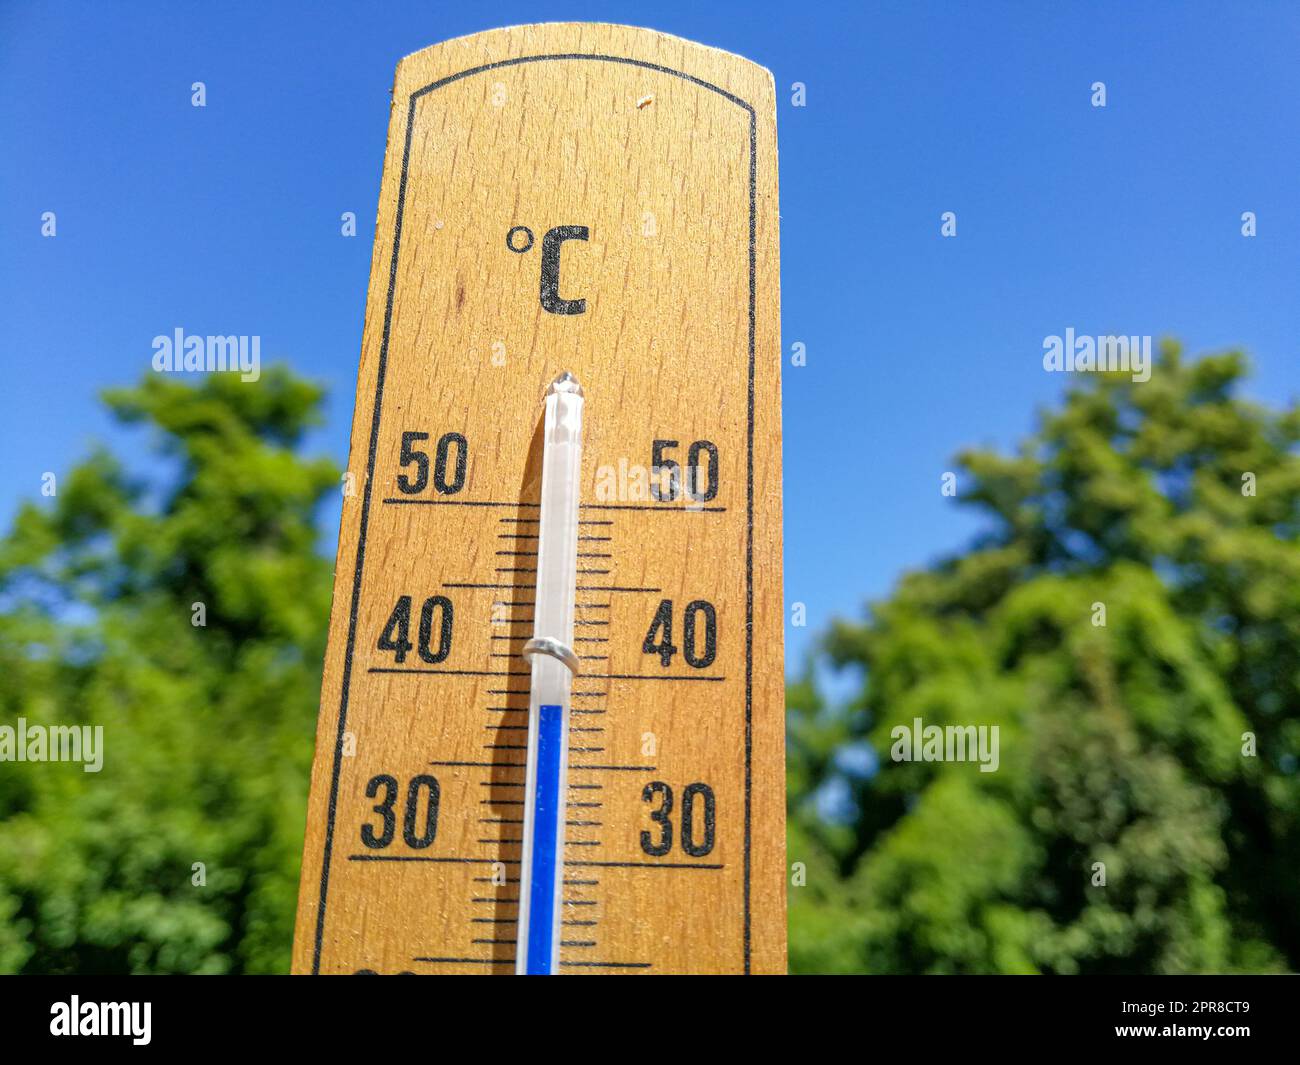 Maximum and minimum thermometer - Stock Image - E180/0301 - Science Photo  Library